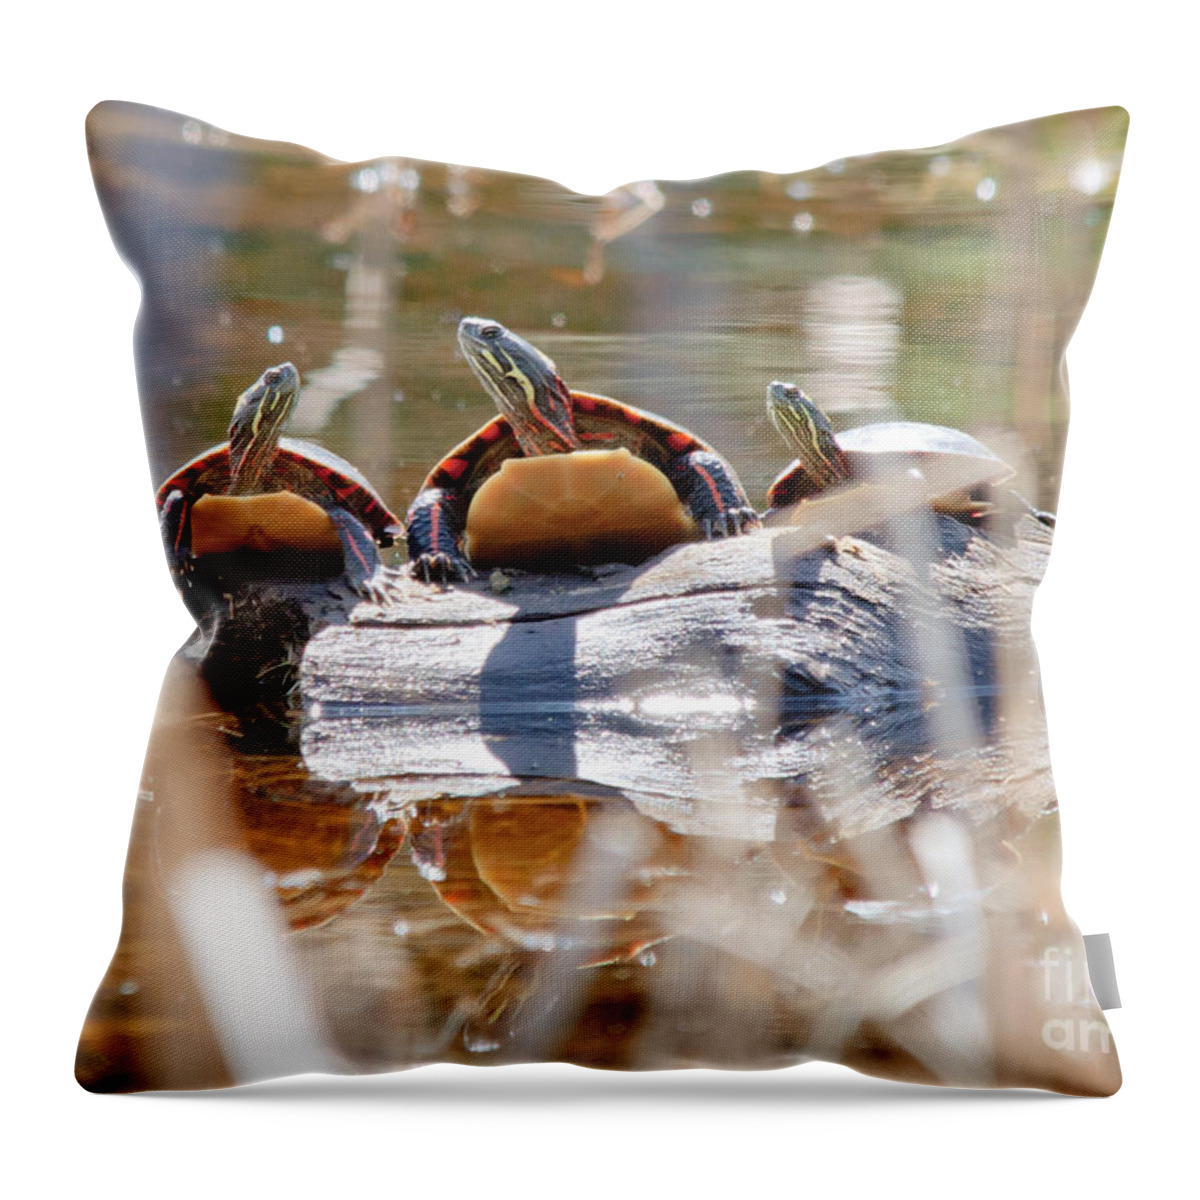 Painted Turtle Throw Pillow featuring the photograph Hello Hello Hello by Cheryl Baxter